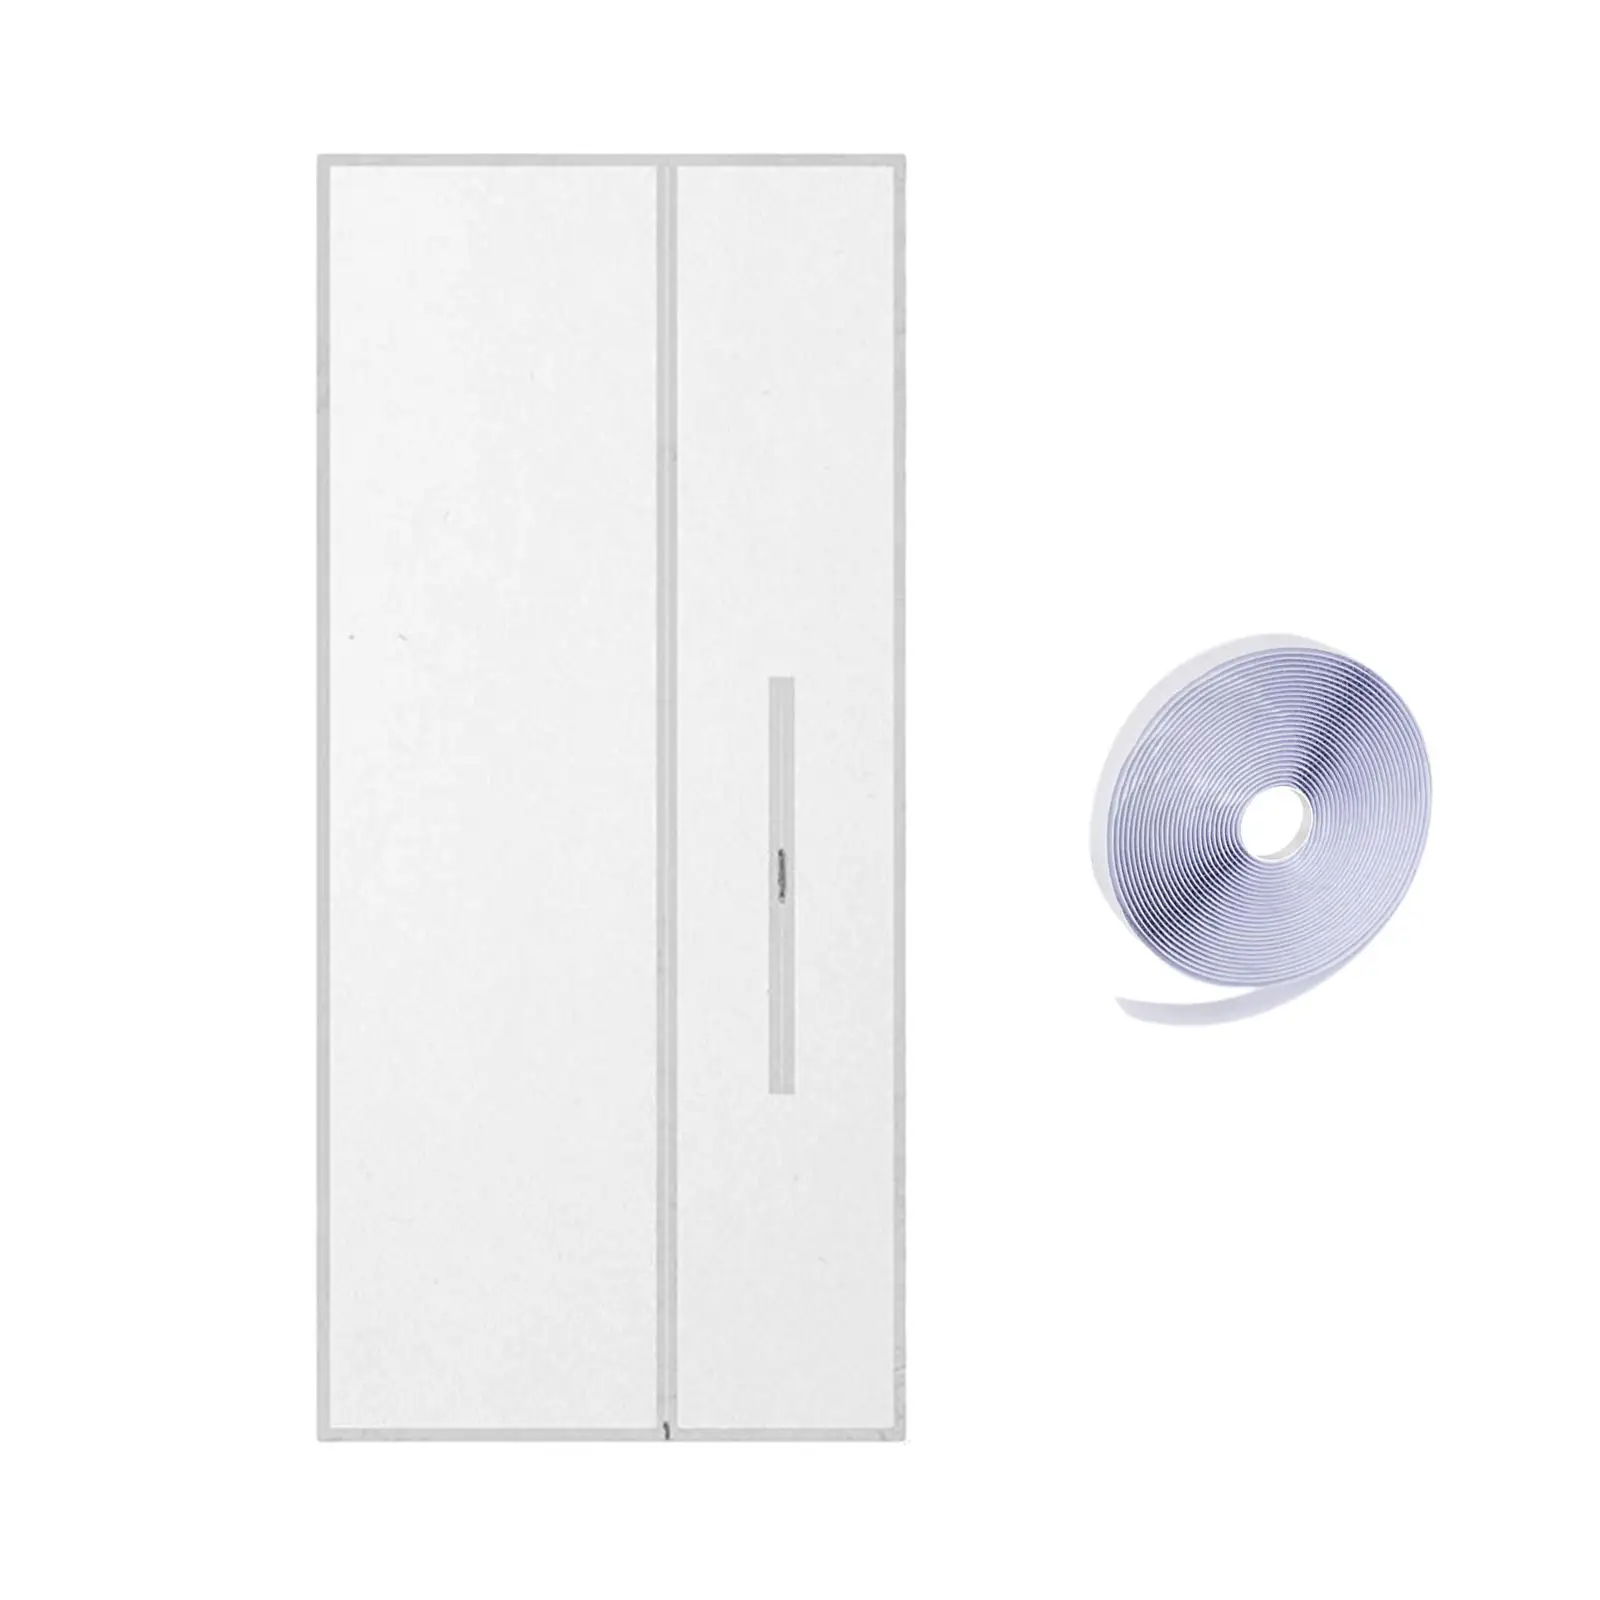 Door Seal for Portable Air Conditioner and Tumble Dryer for Living Room Home